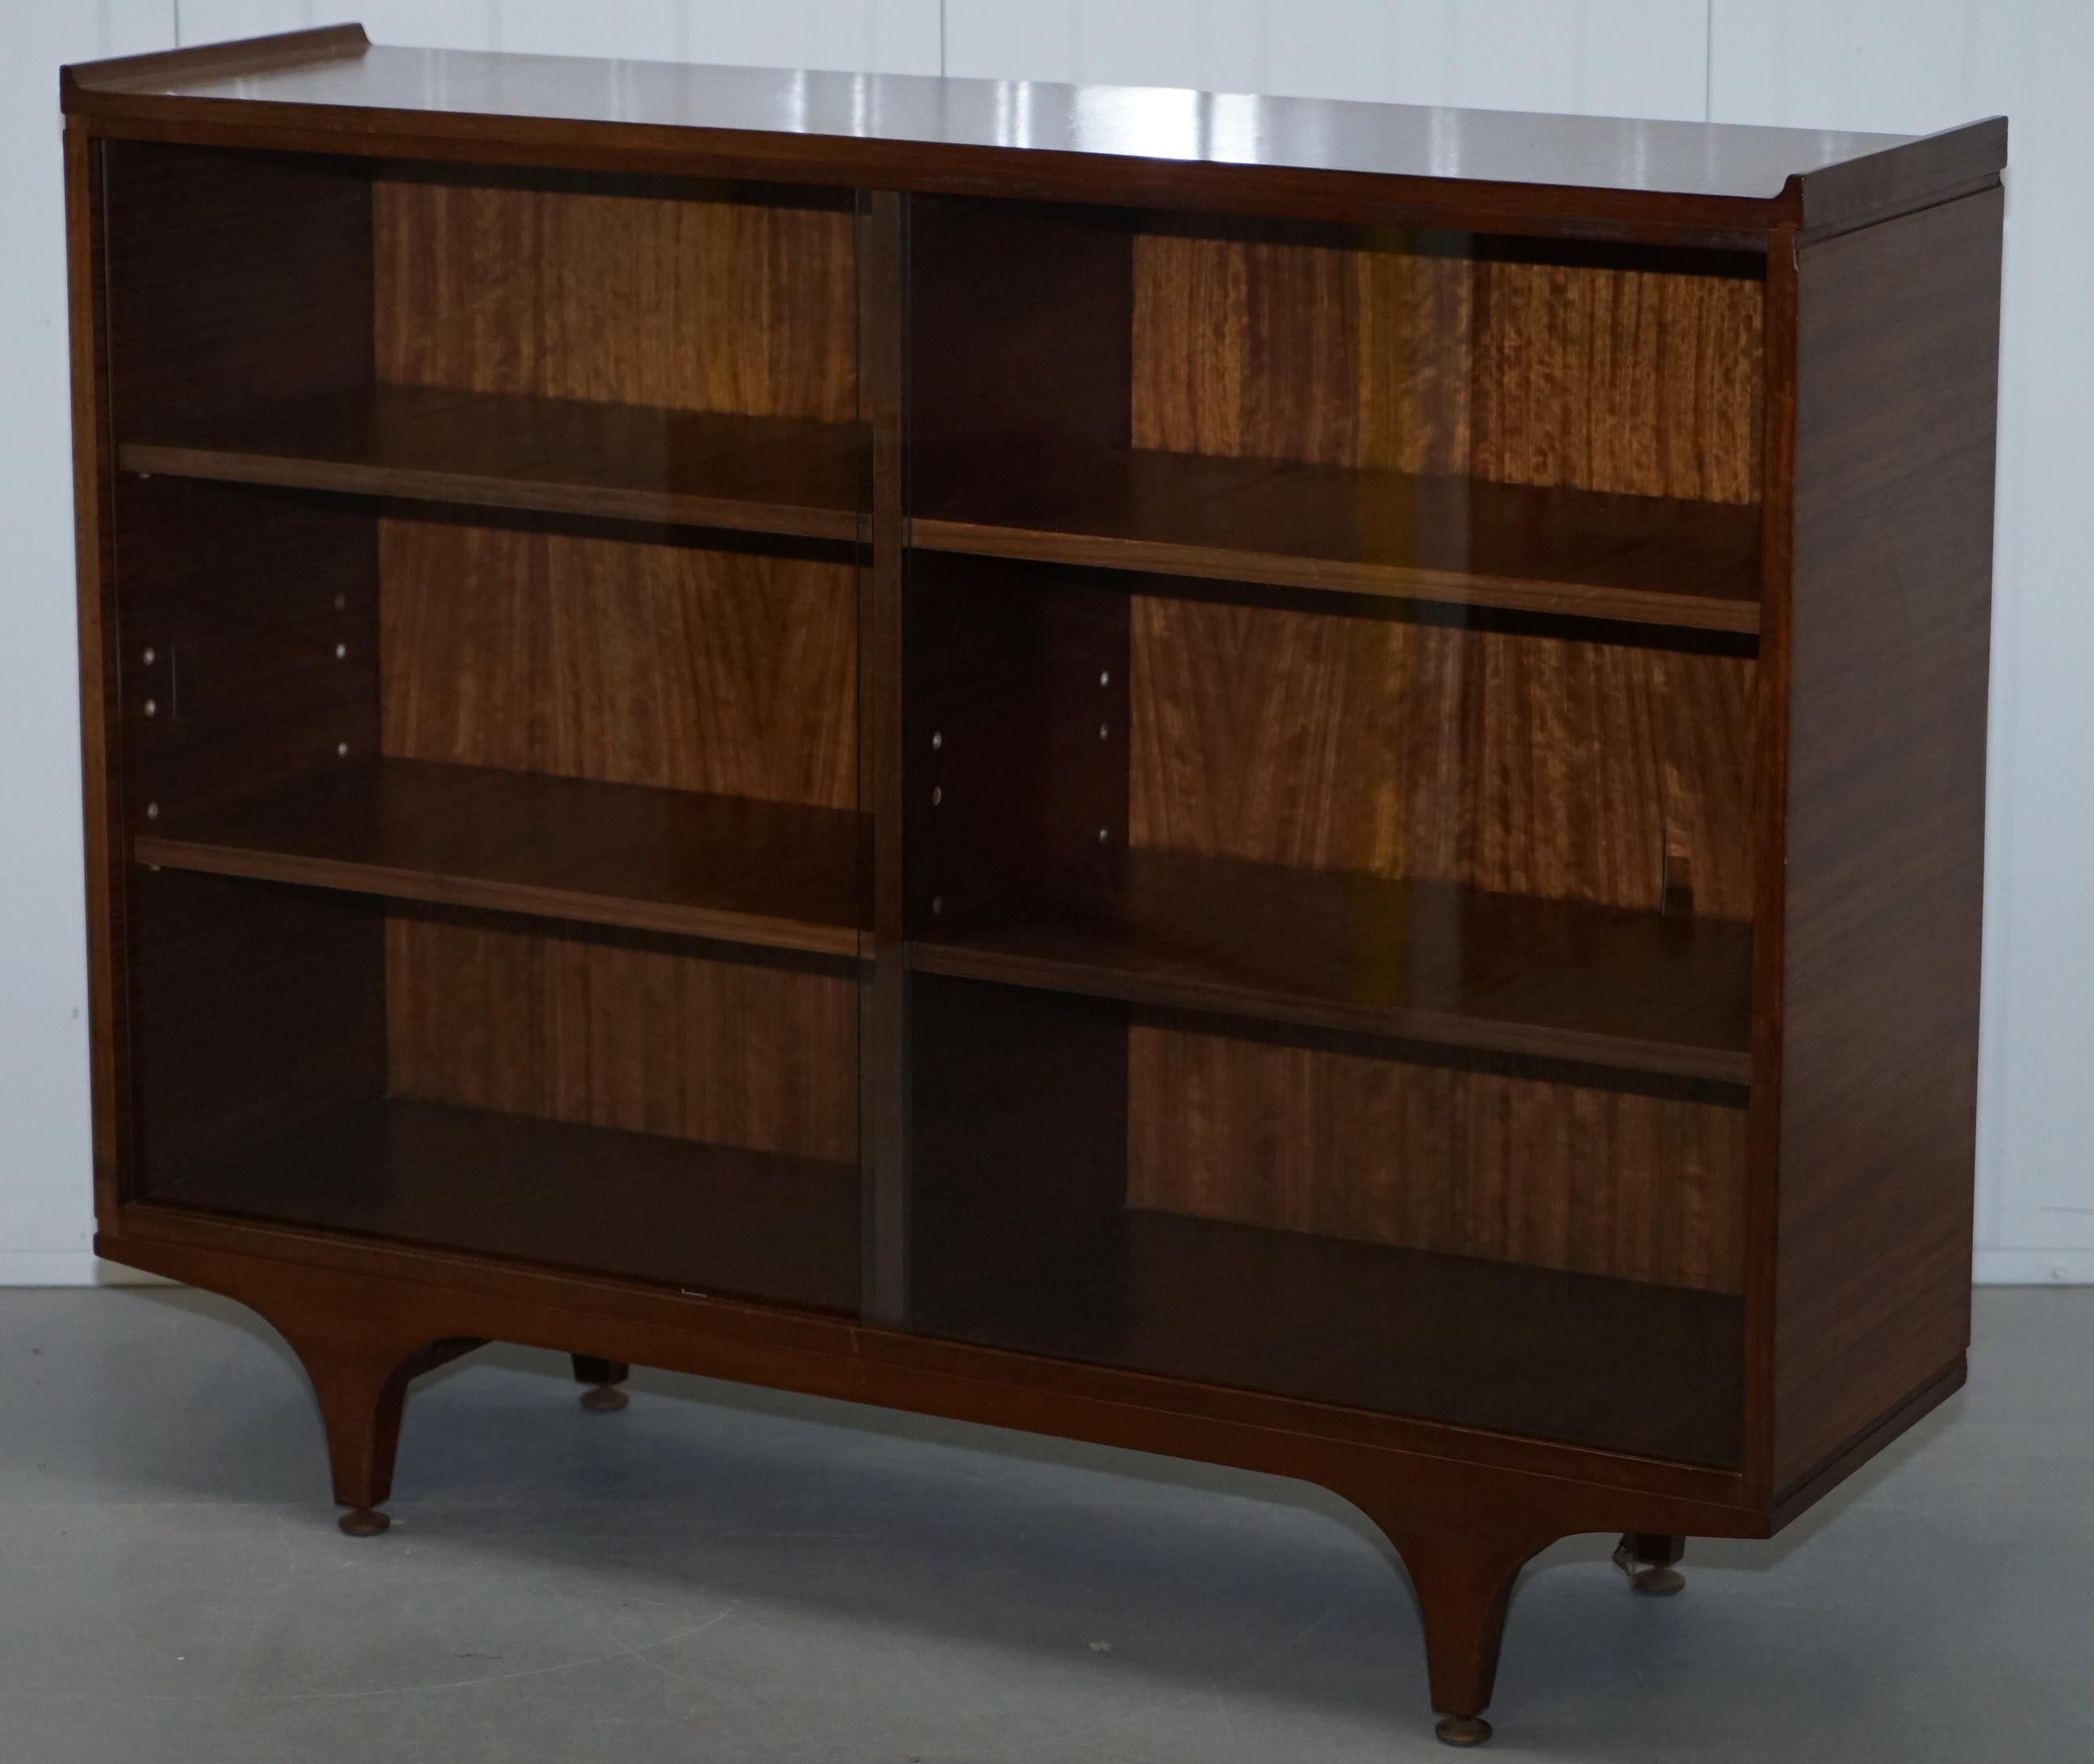 Pair of Sculpted Mid-Century Modern Teak Bookcases with Glass Sliding Doors 7